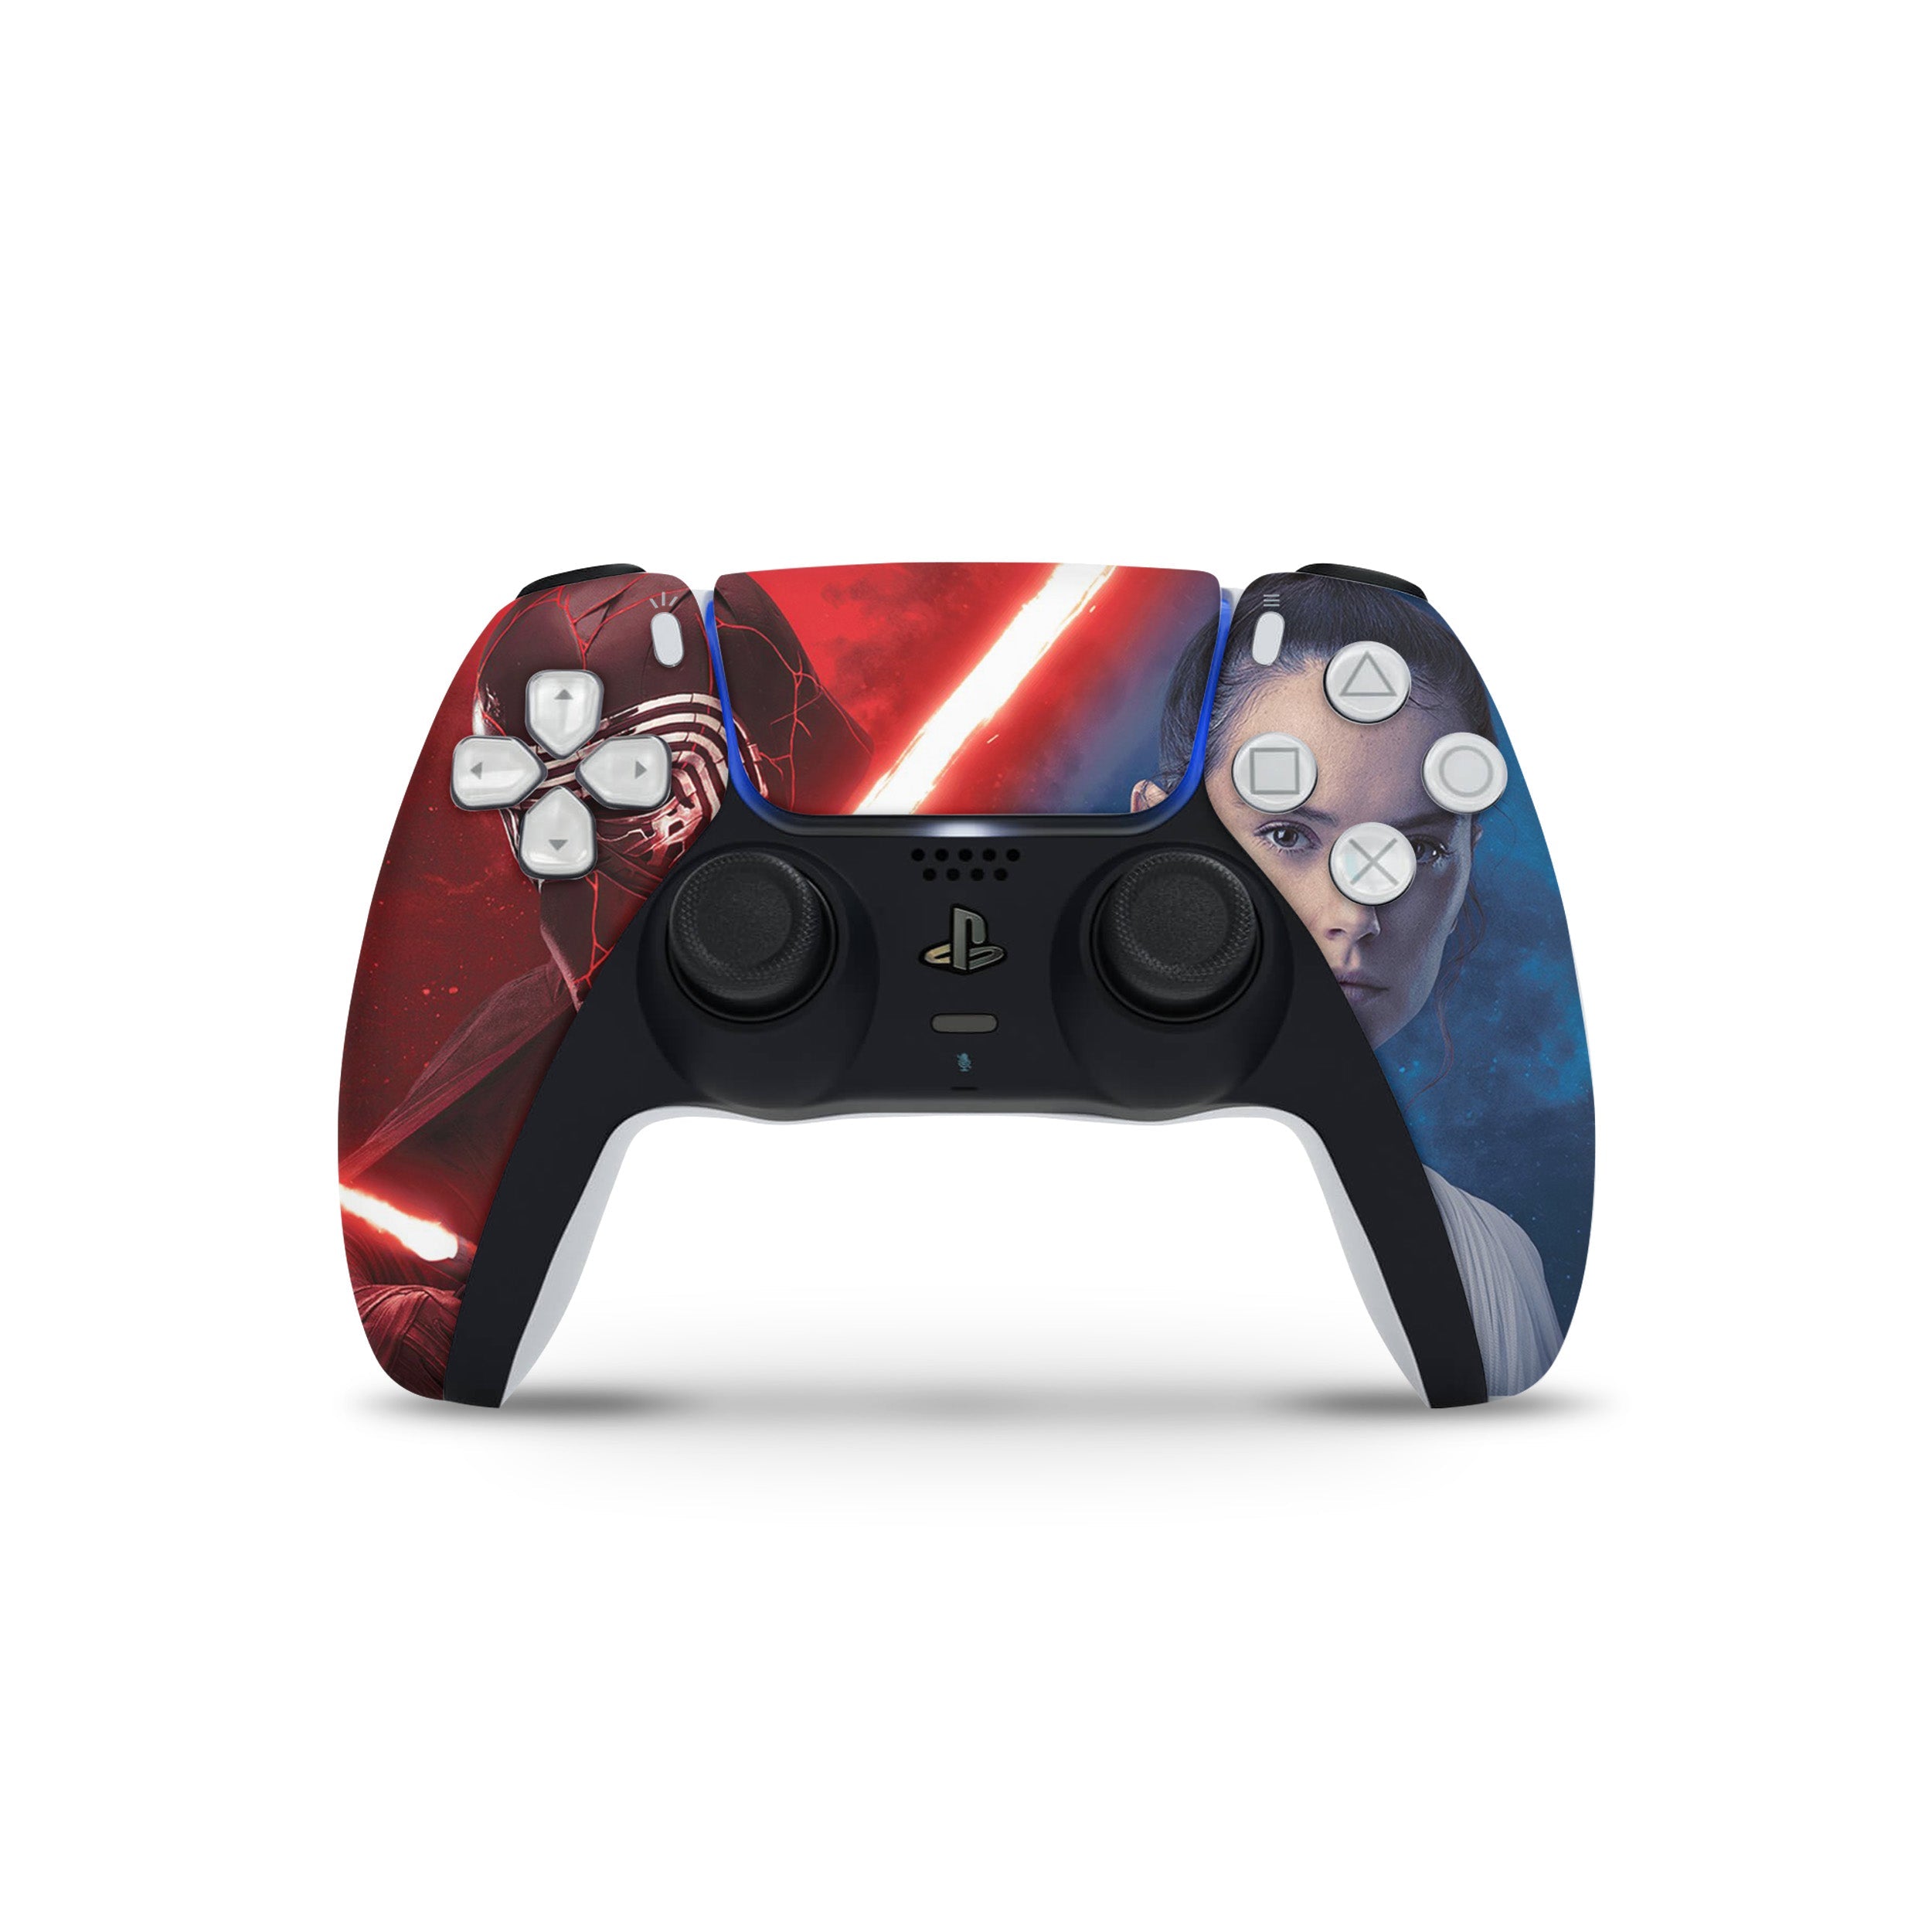 A video game skin featuring a Star Wars design for the PS5 DualSense Controller.